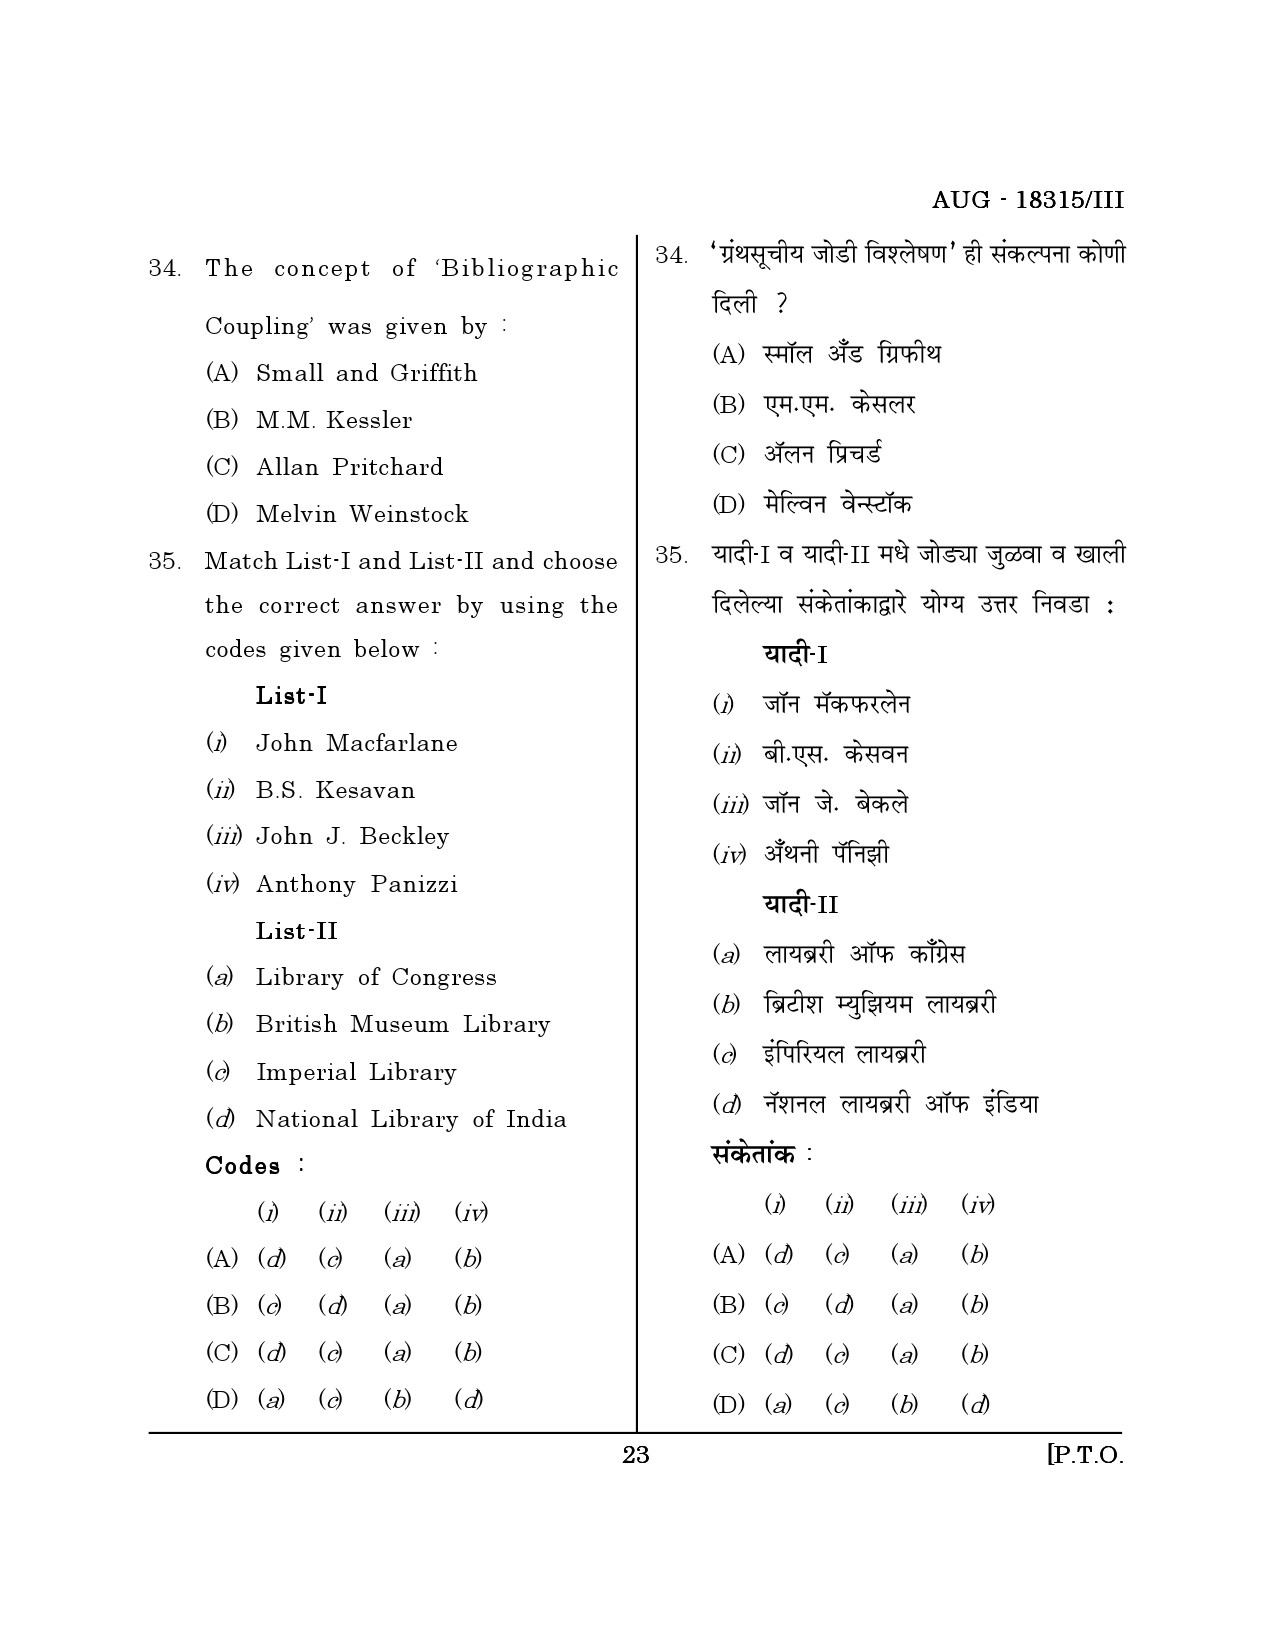 Maharashtra SET Library Information Science Question Paper III August 2015 22